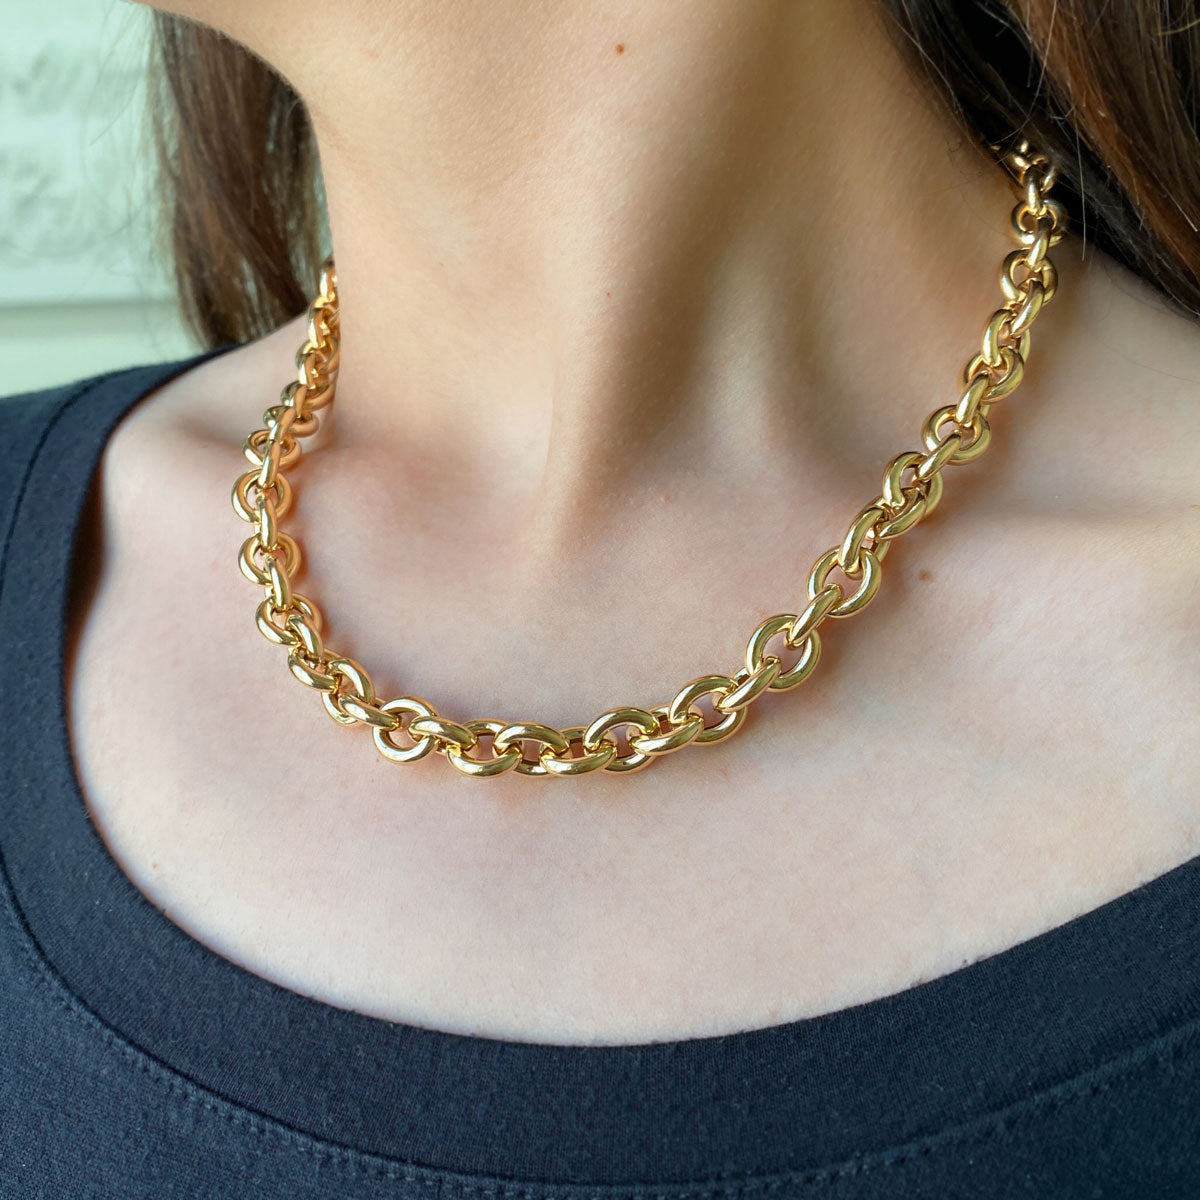 Tres Luxe Chain Necklace 14K Yellow Gold / 20 Inches by Baby Gold - Shop Custom Gold Jewelry